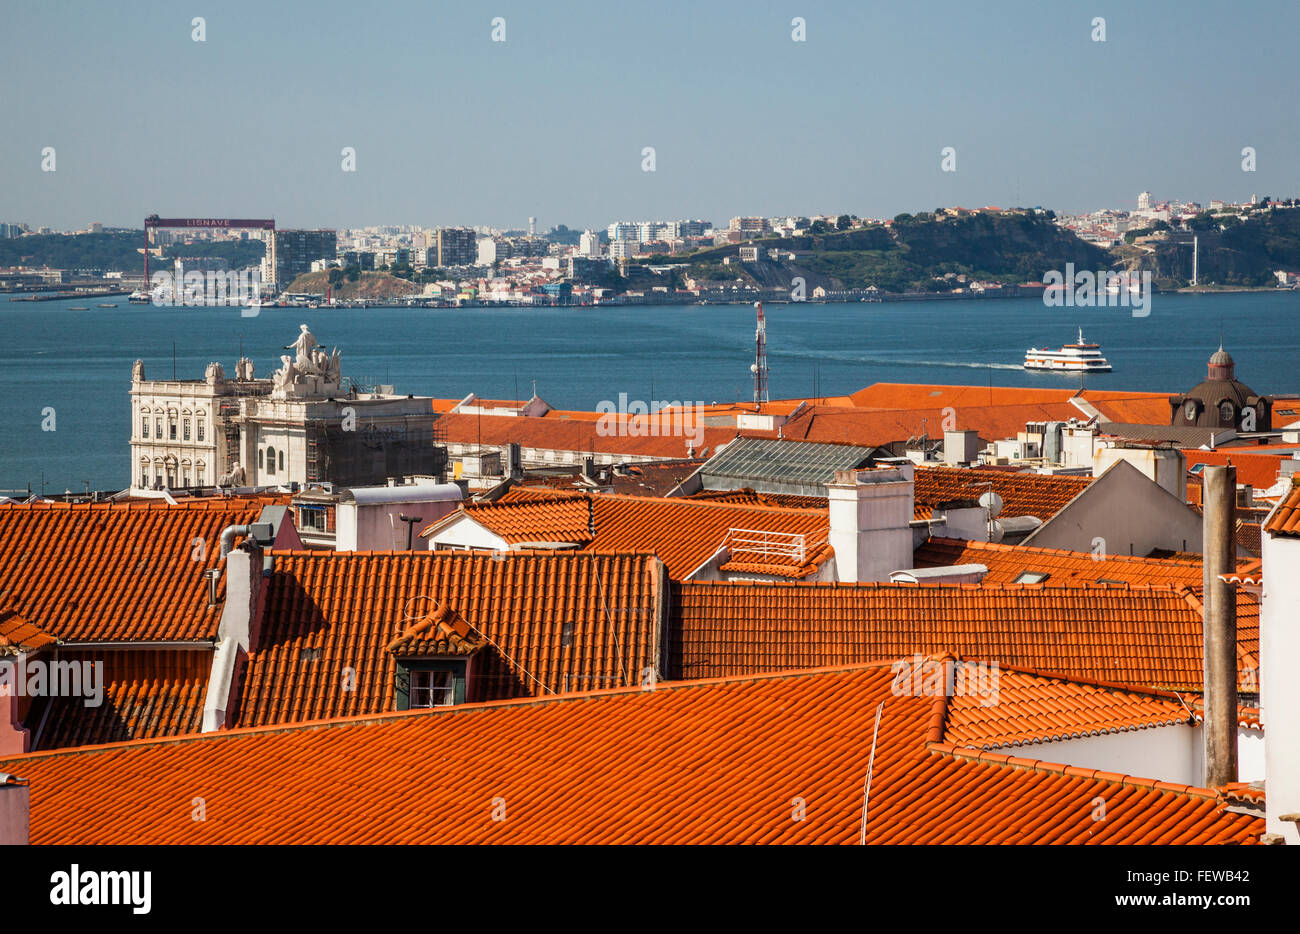 Portugal, Lisbon, view over the roof of Lisbon  with the Arco Triunfal at Commerce Square and the approaching ferry on the Tagus Stock Photo